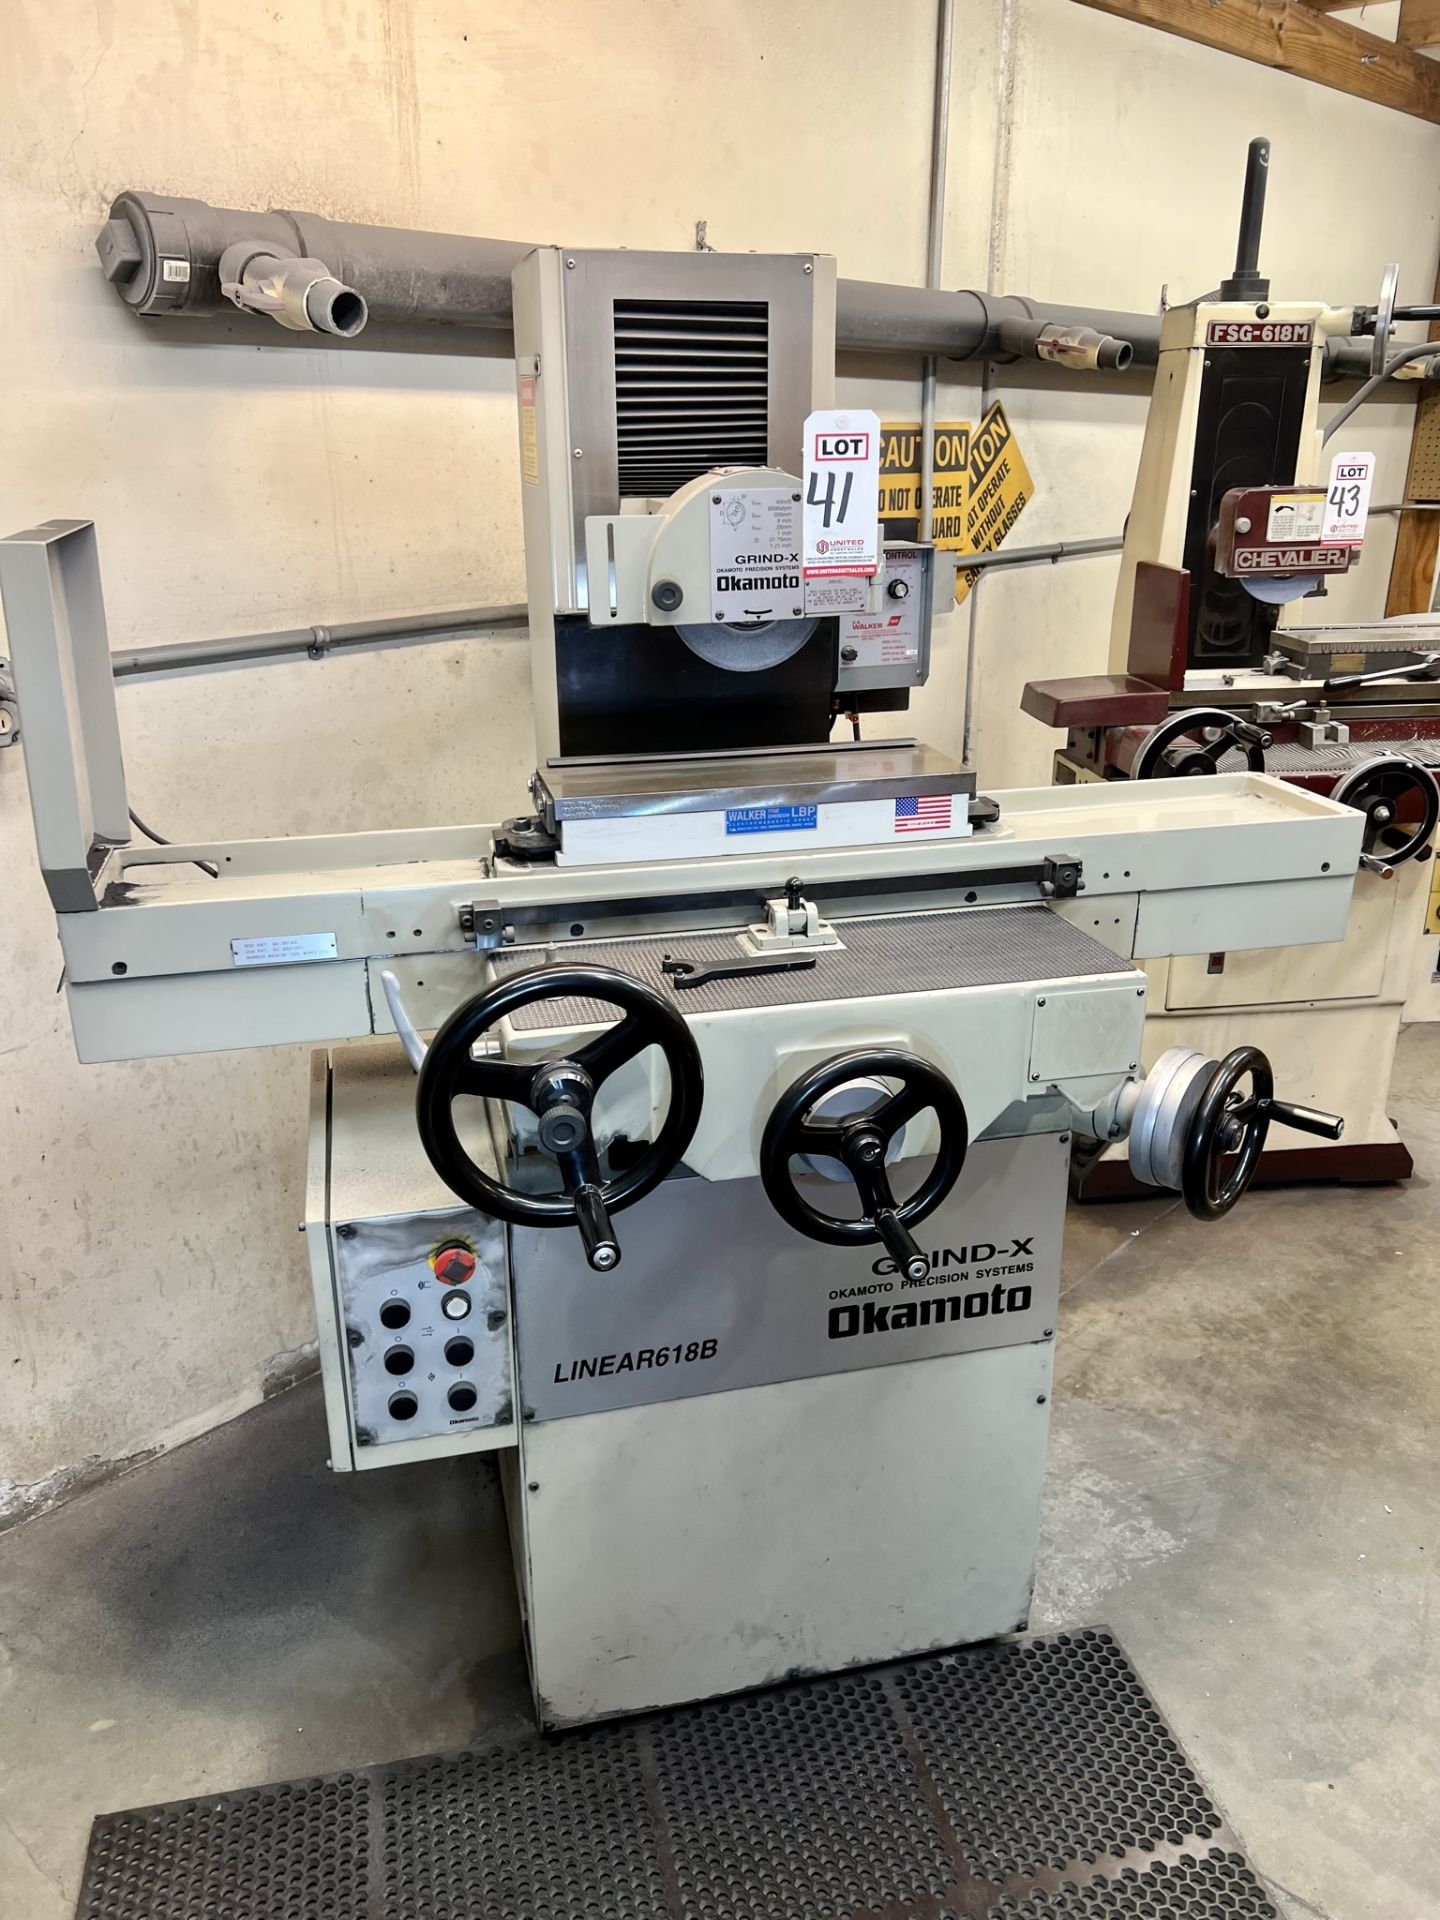 2018 OKAMOTO LINEAR 618B SURFACE GRINDER, S/N 48824, W/ WALKER 18" X 6" MAGNETIC CHUCK AND CONTROLS, - Image 3 of 15